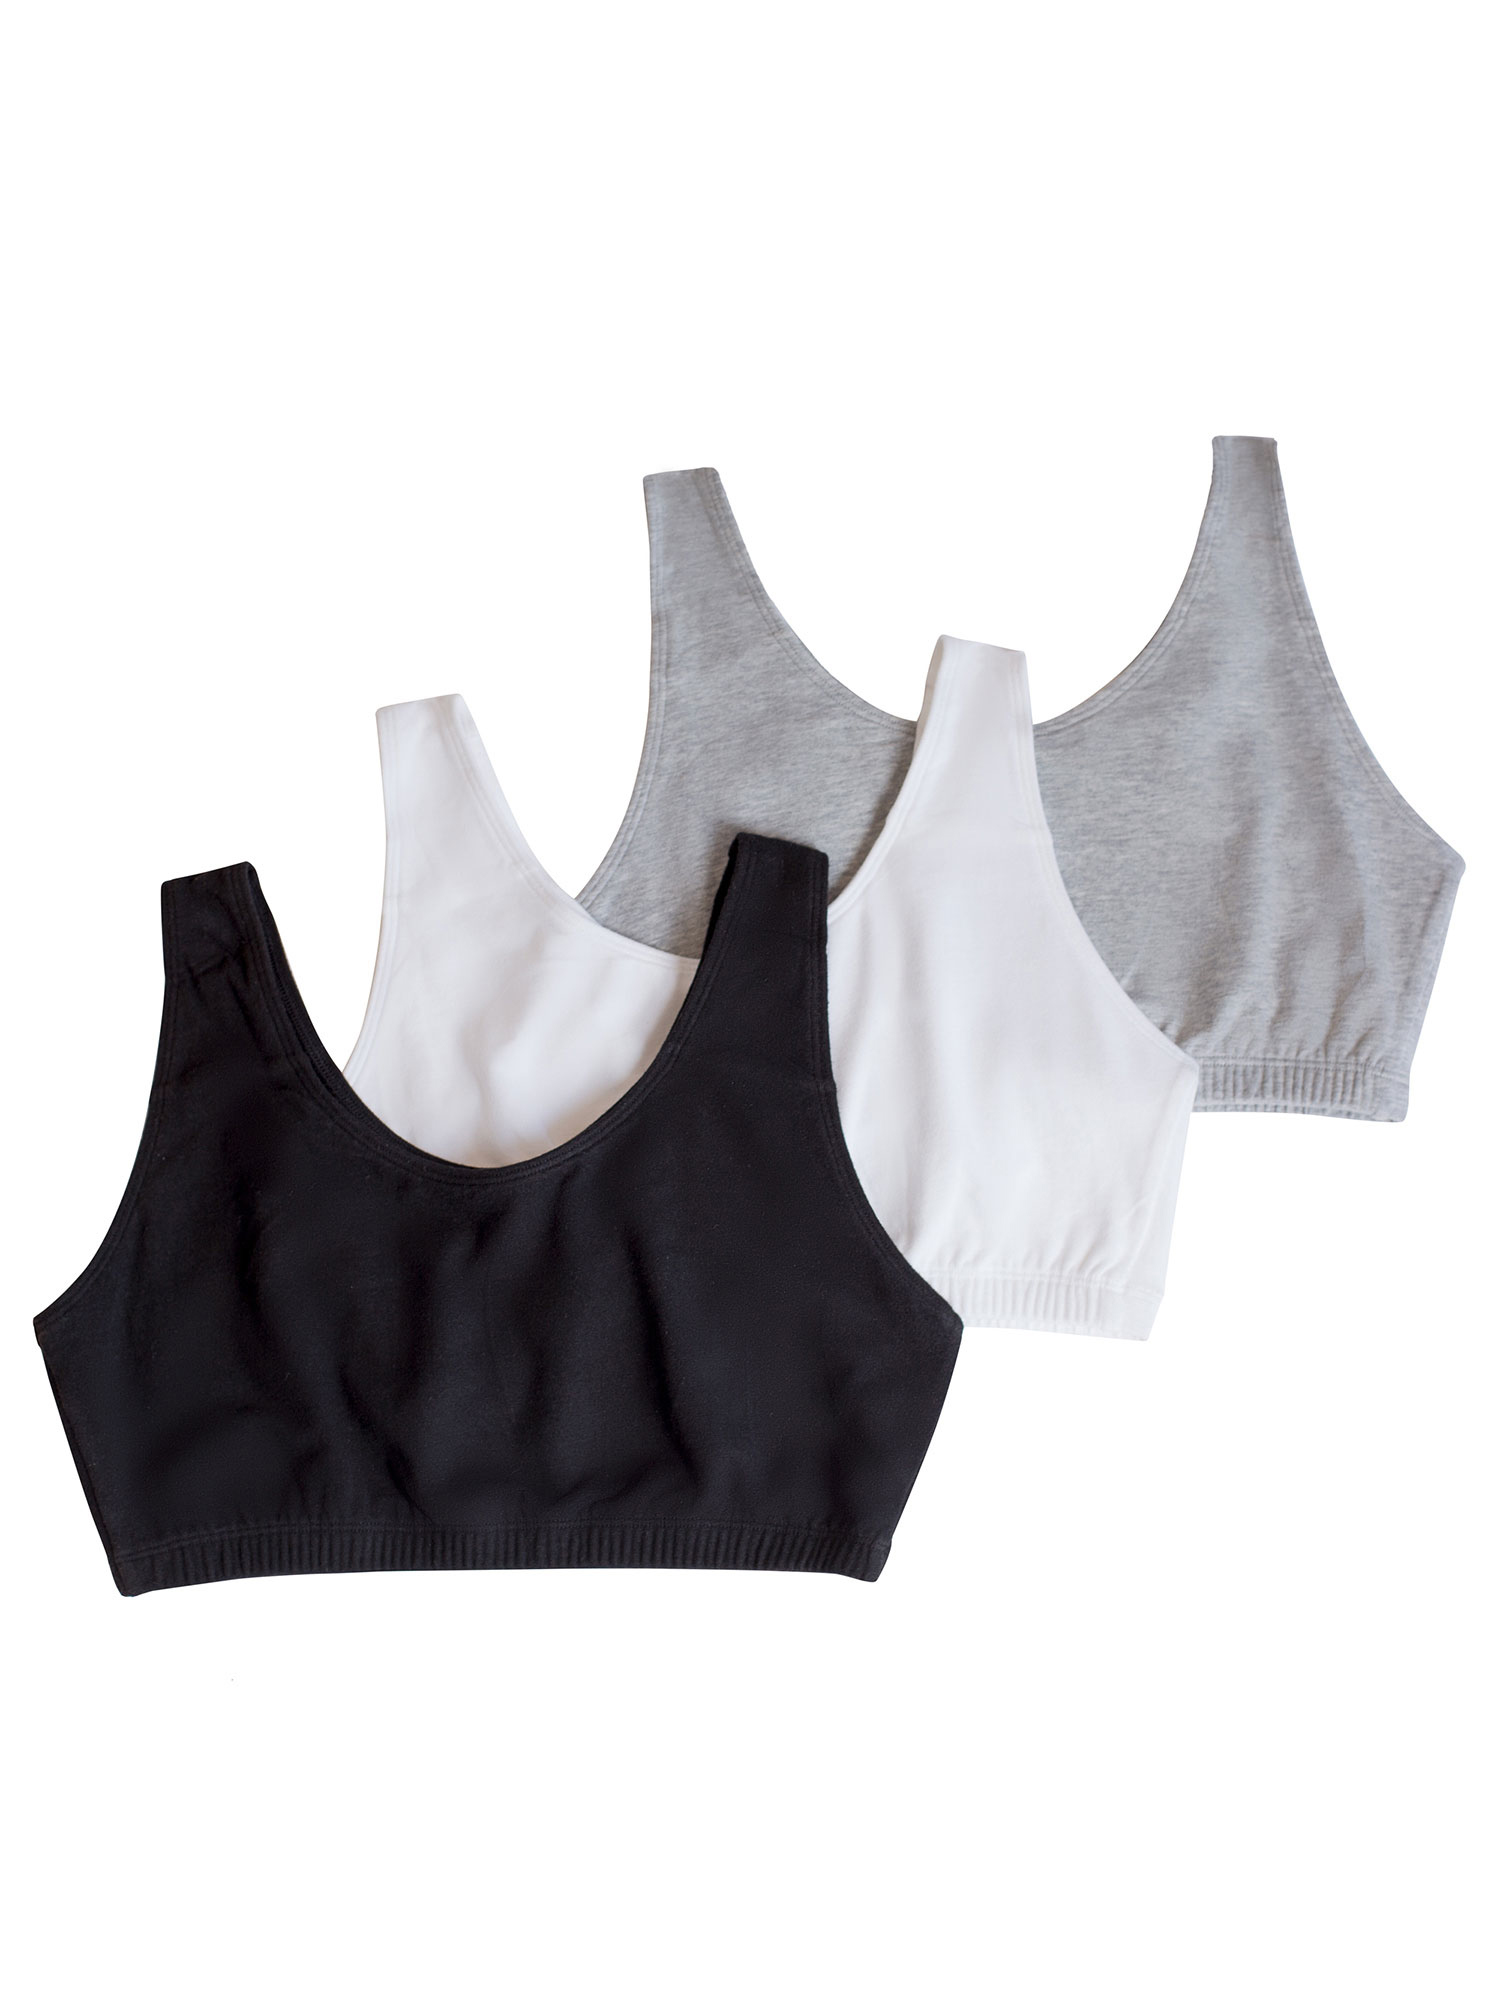 Fruit of the Loom Women's Tank Style Cotton Sports Bra, 3-Pack, Style-9012 - image 1 of 9